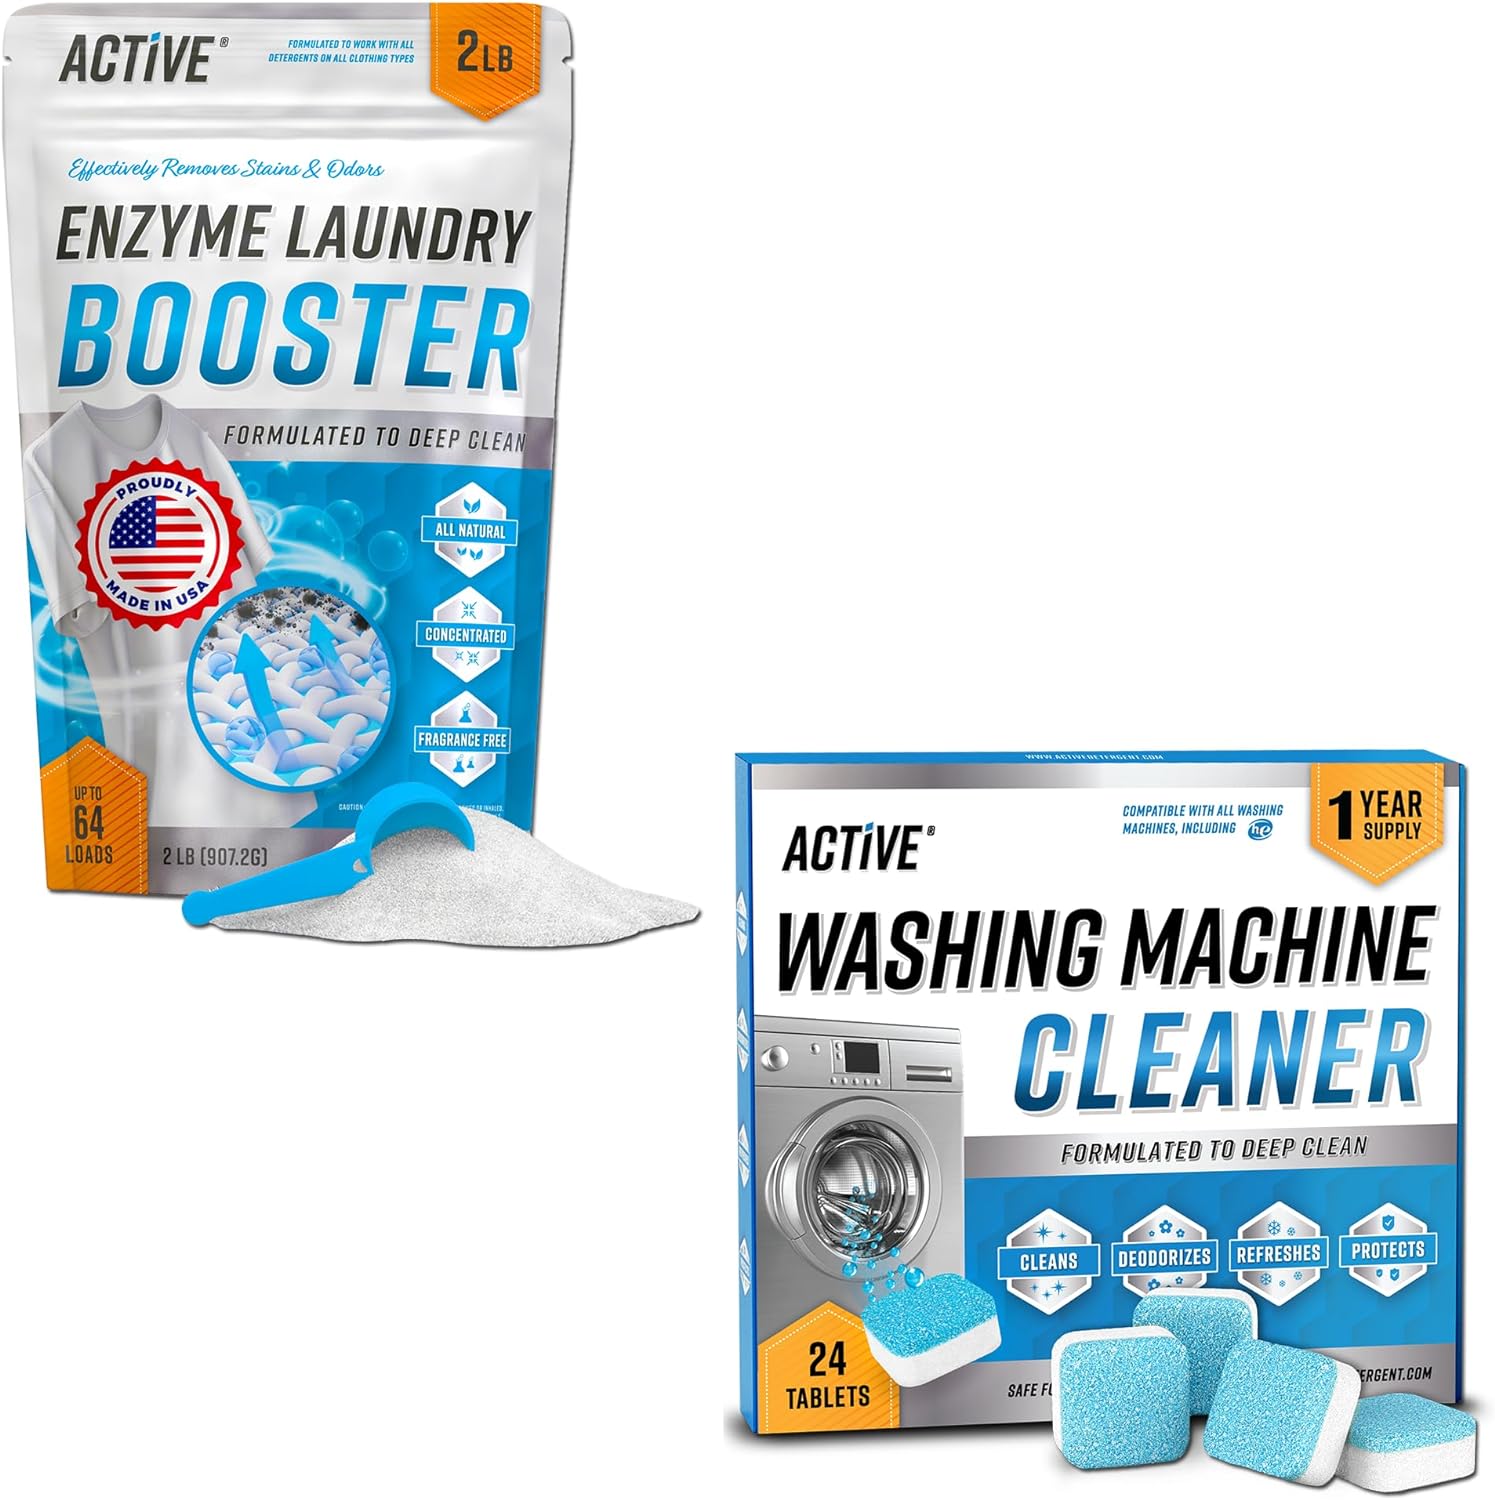 ACTIVE Enzyme Laundry Booster and Washing Machine Cleaner - Includes 2lbs Detergent Boosting Powder and 24ct Washing Machine Cleaning Tablets